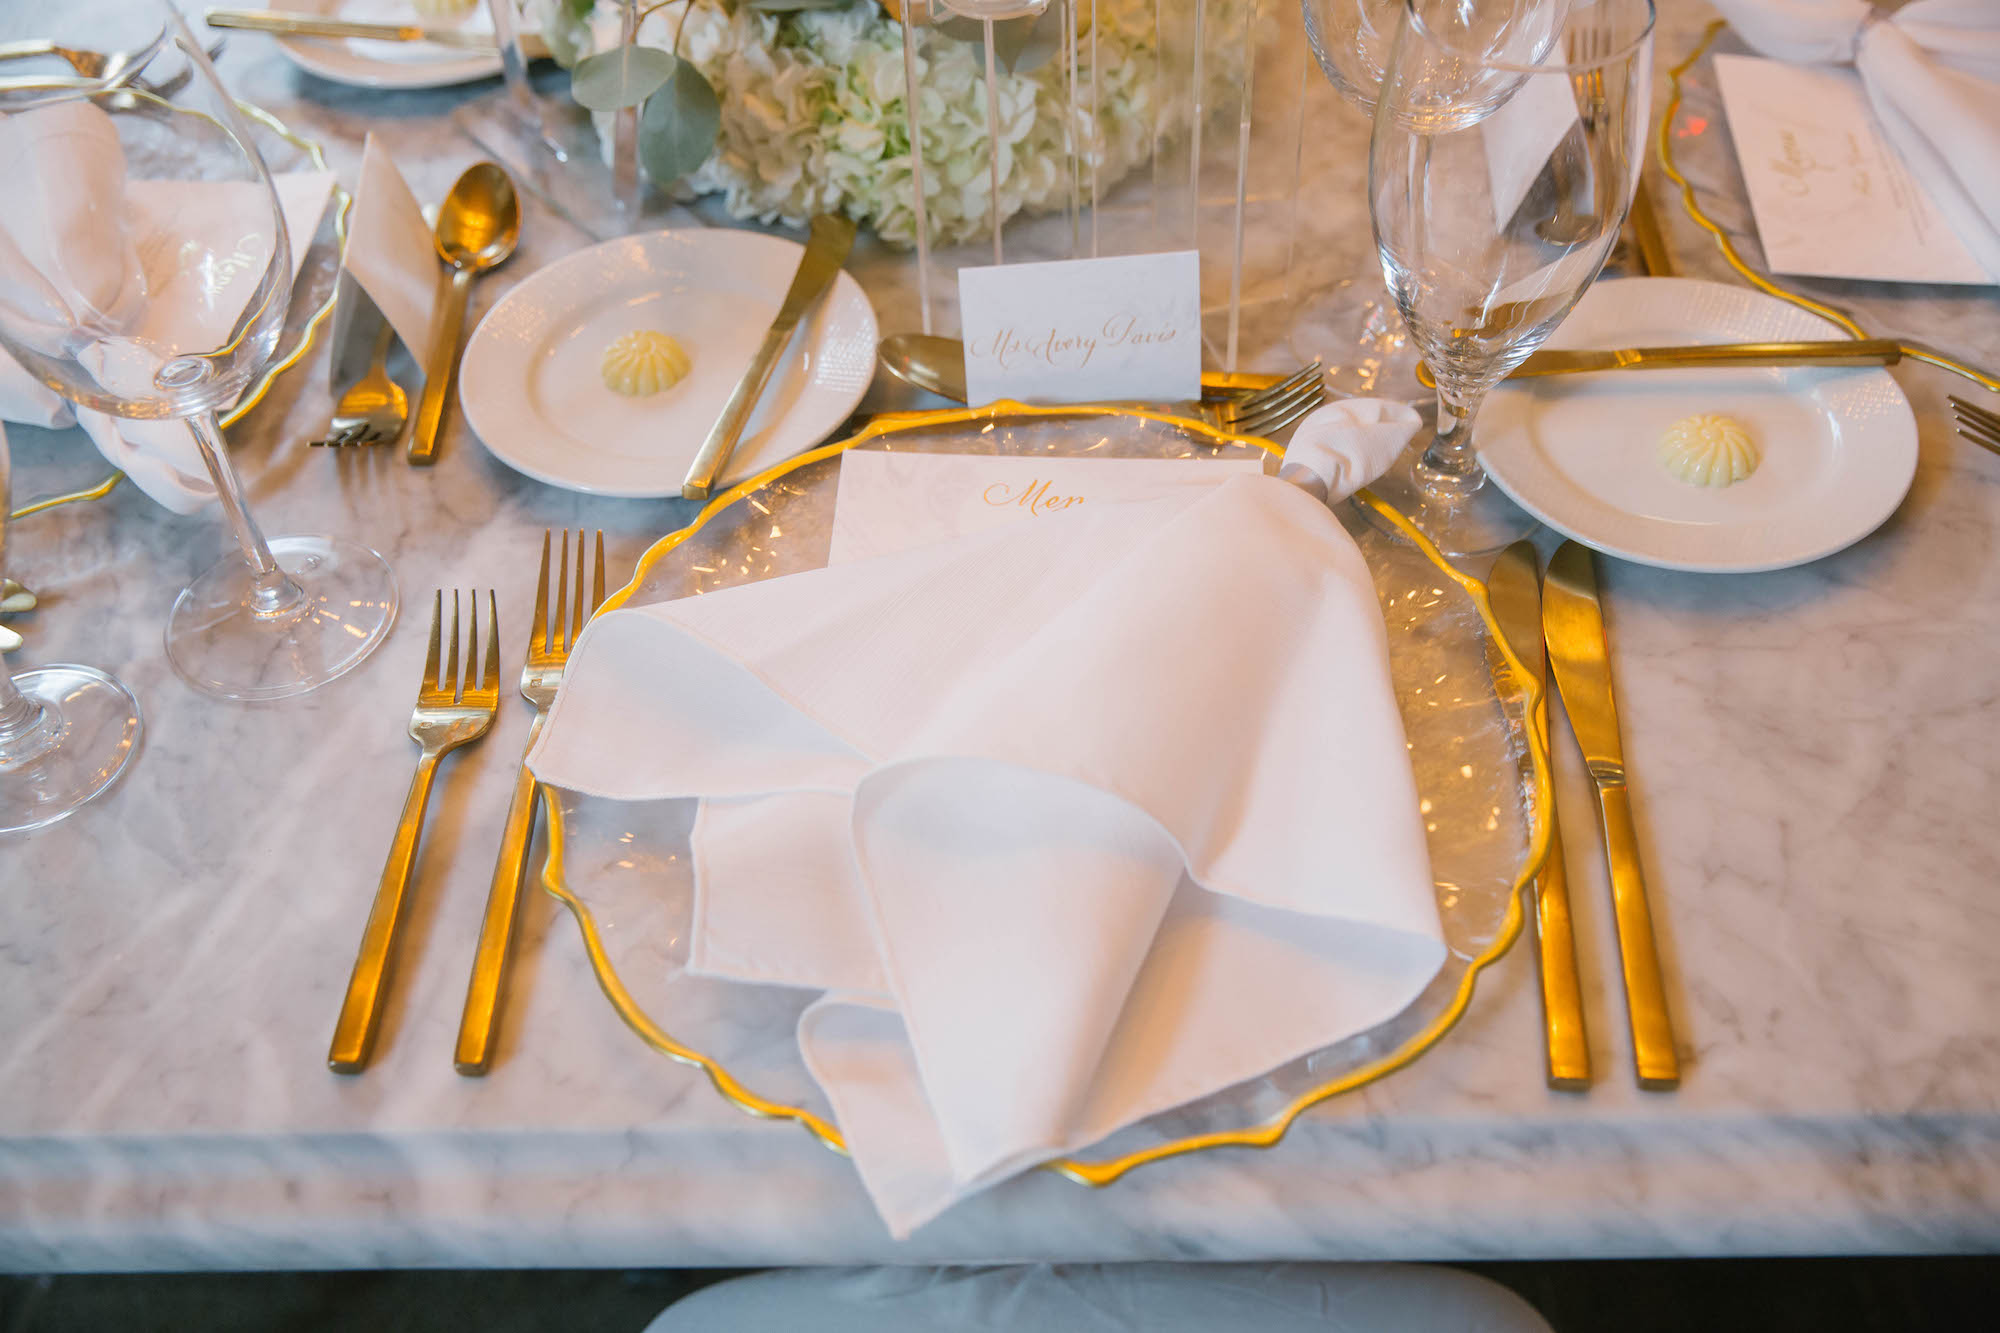 Elegant Wedding Reception Decor, Gold Rimmed Chargers with Gold Flatware and White Linen on Marble Table | Tampa Bay Wedding Planner Parties A'la Carte